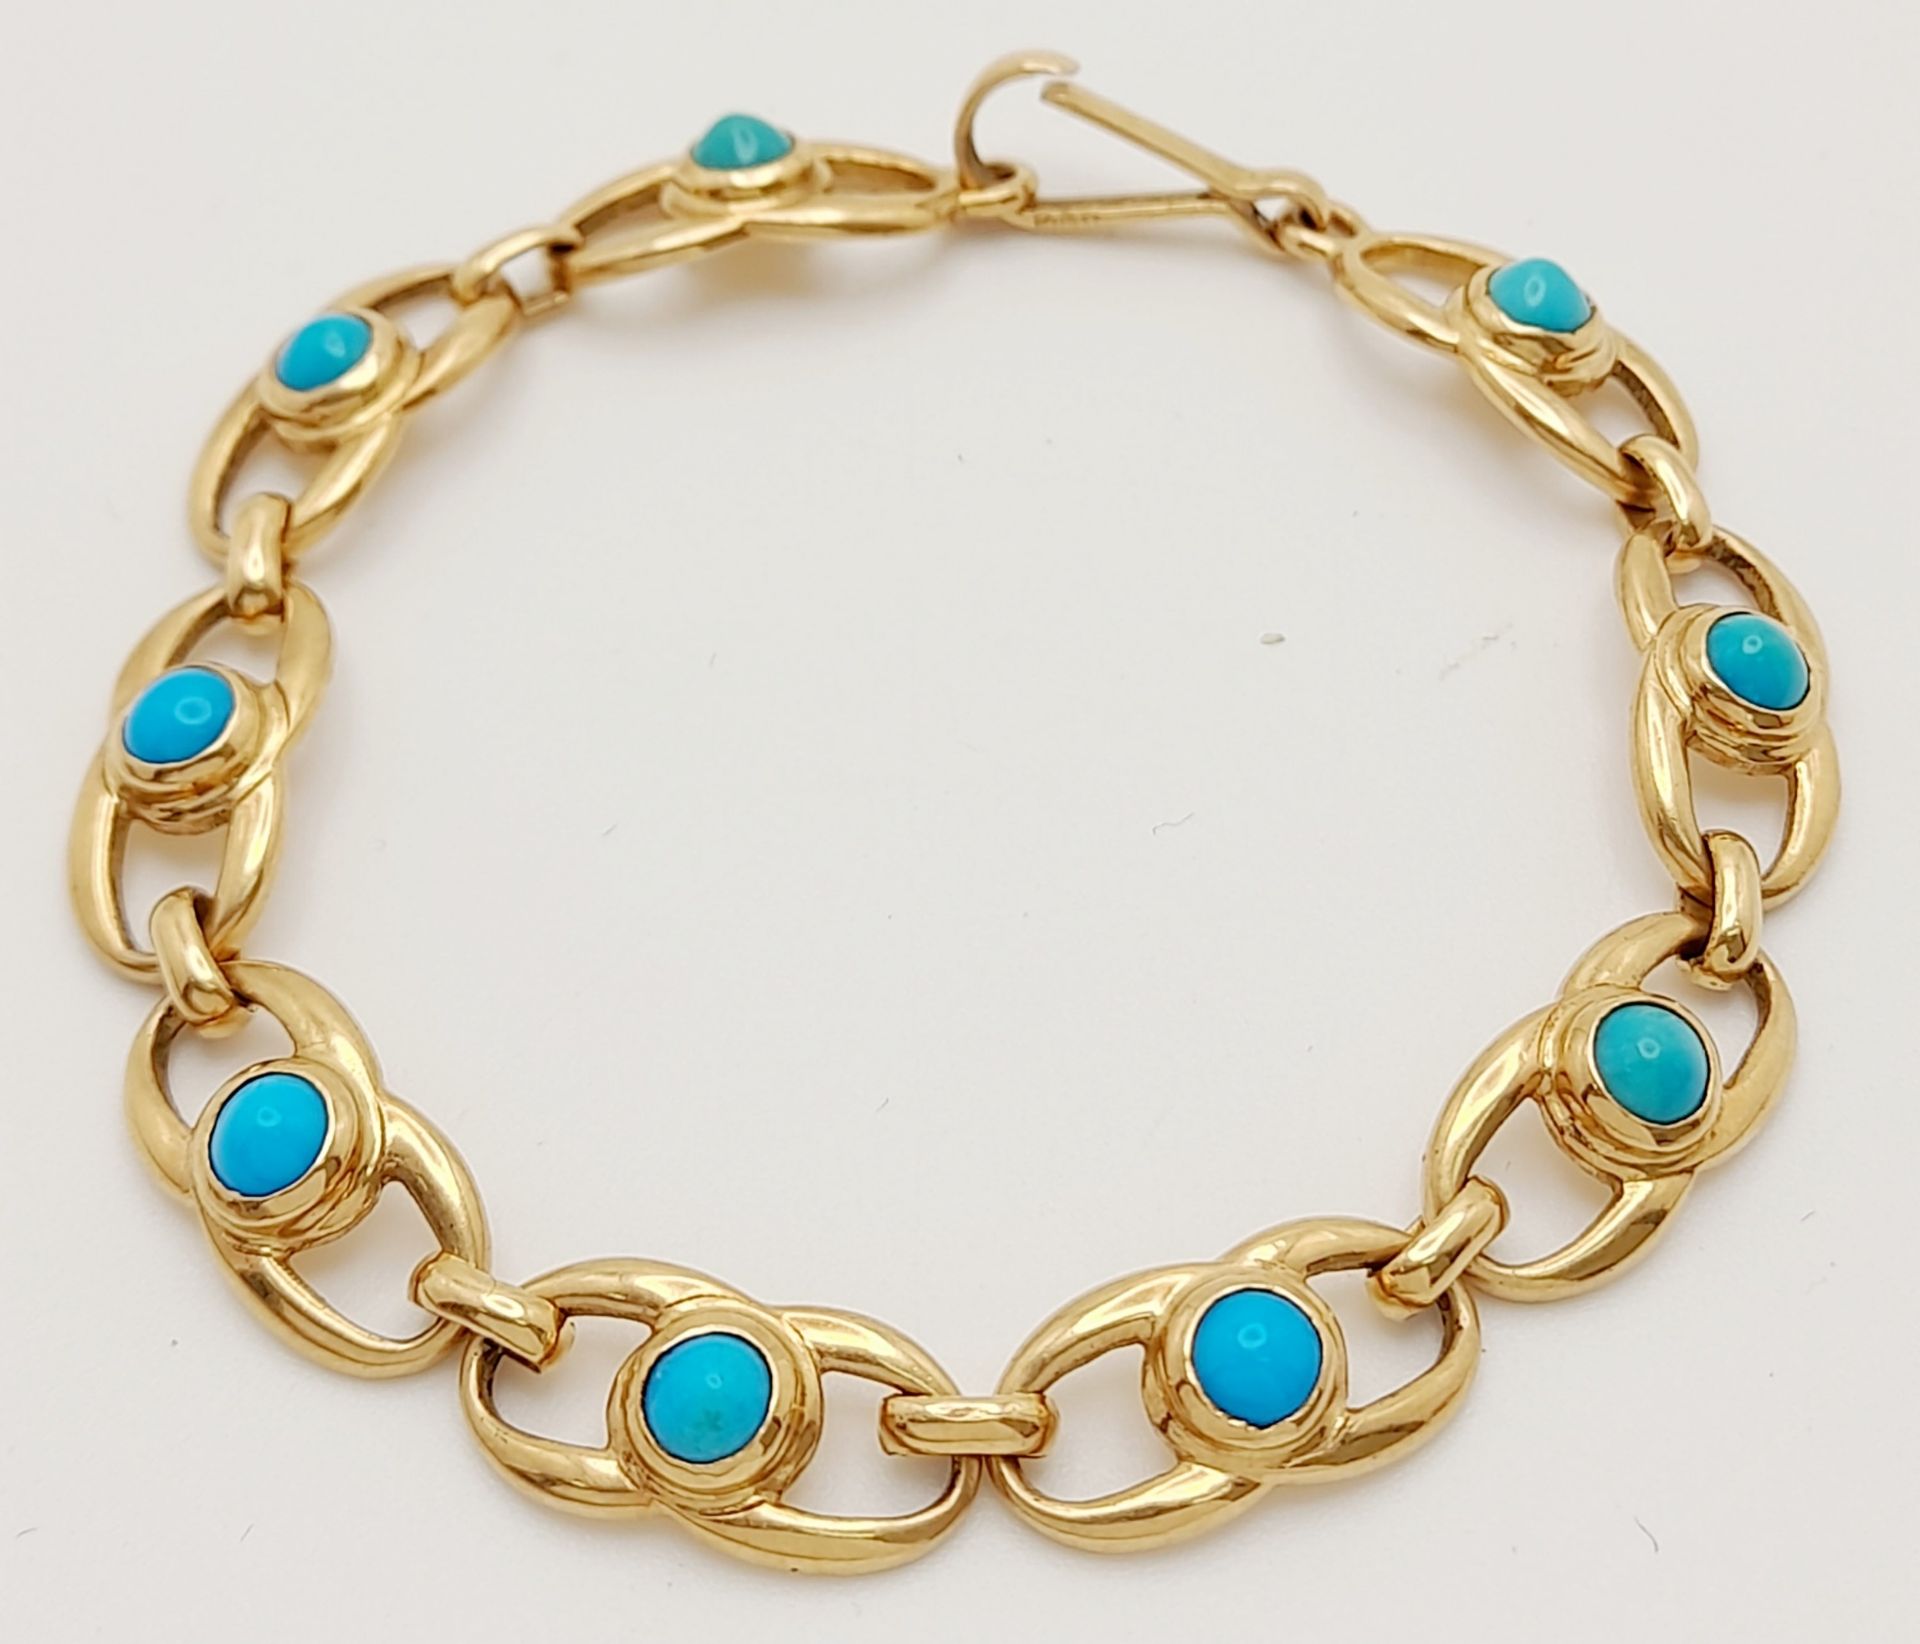 A 18K (TESTED AS) YELLOW GOLD BRACELET SET WITH 9 TURQUOISE STONES, 18CM LENGTH, 15.7G. ref: BM01 - Image 6 of 6